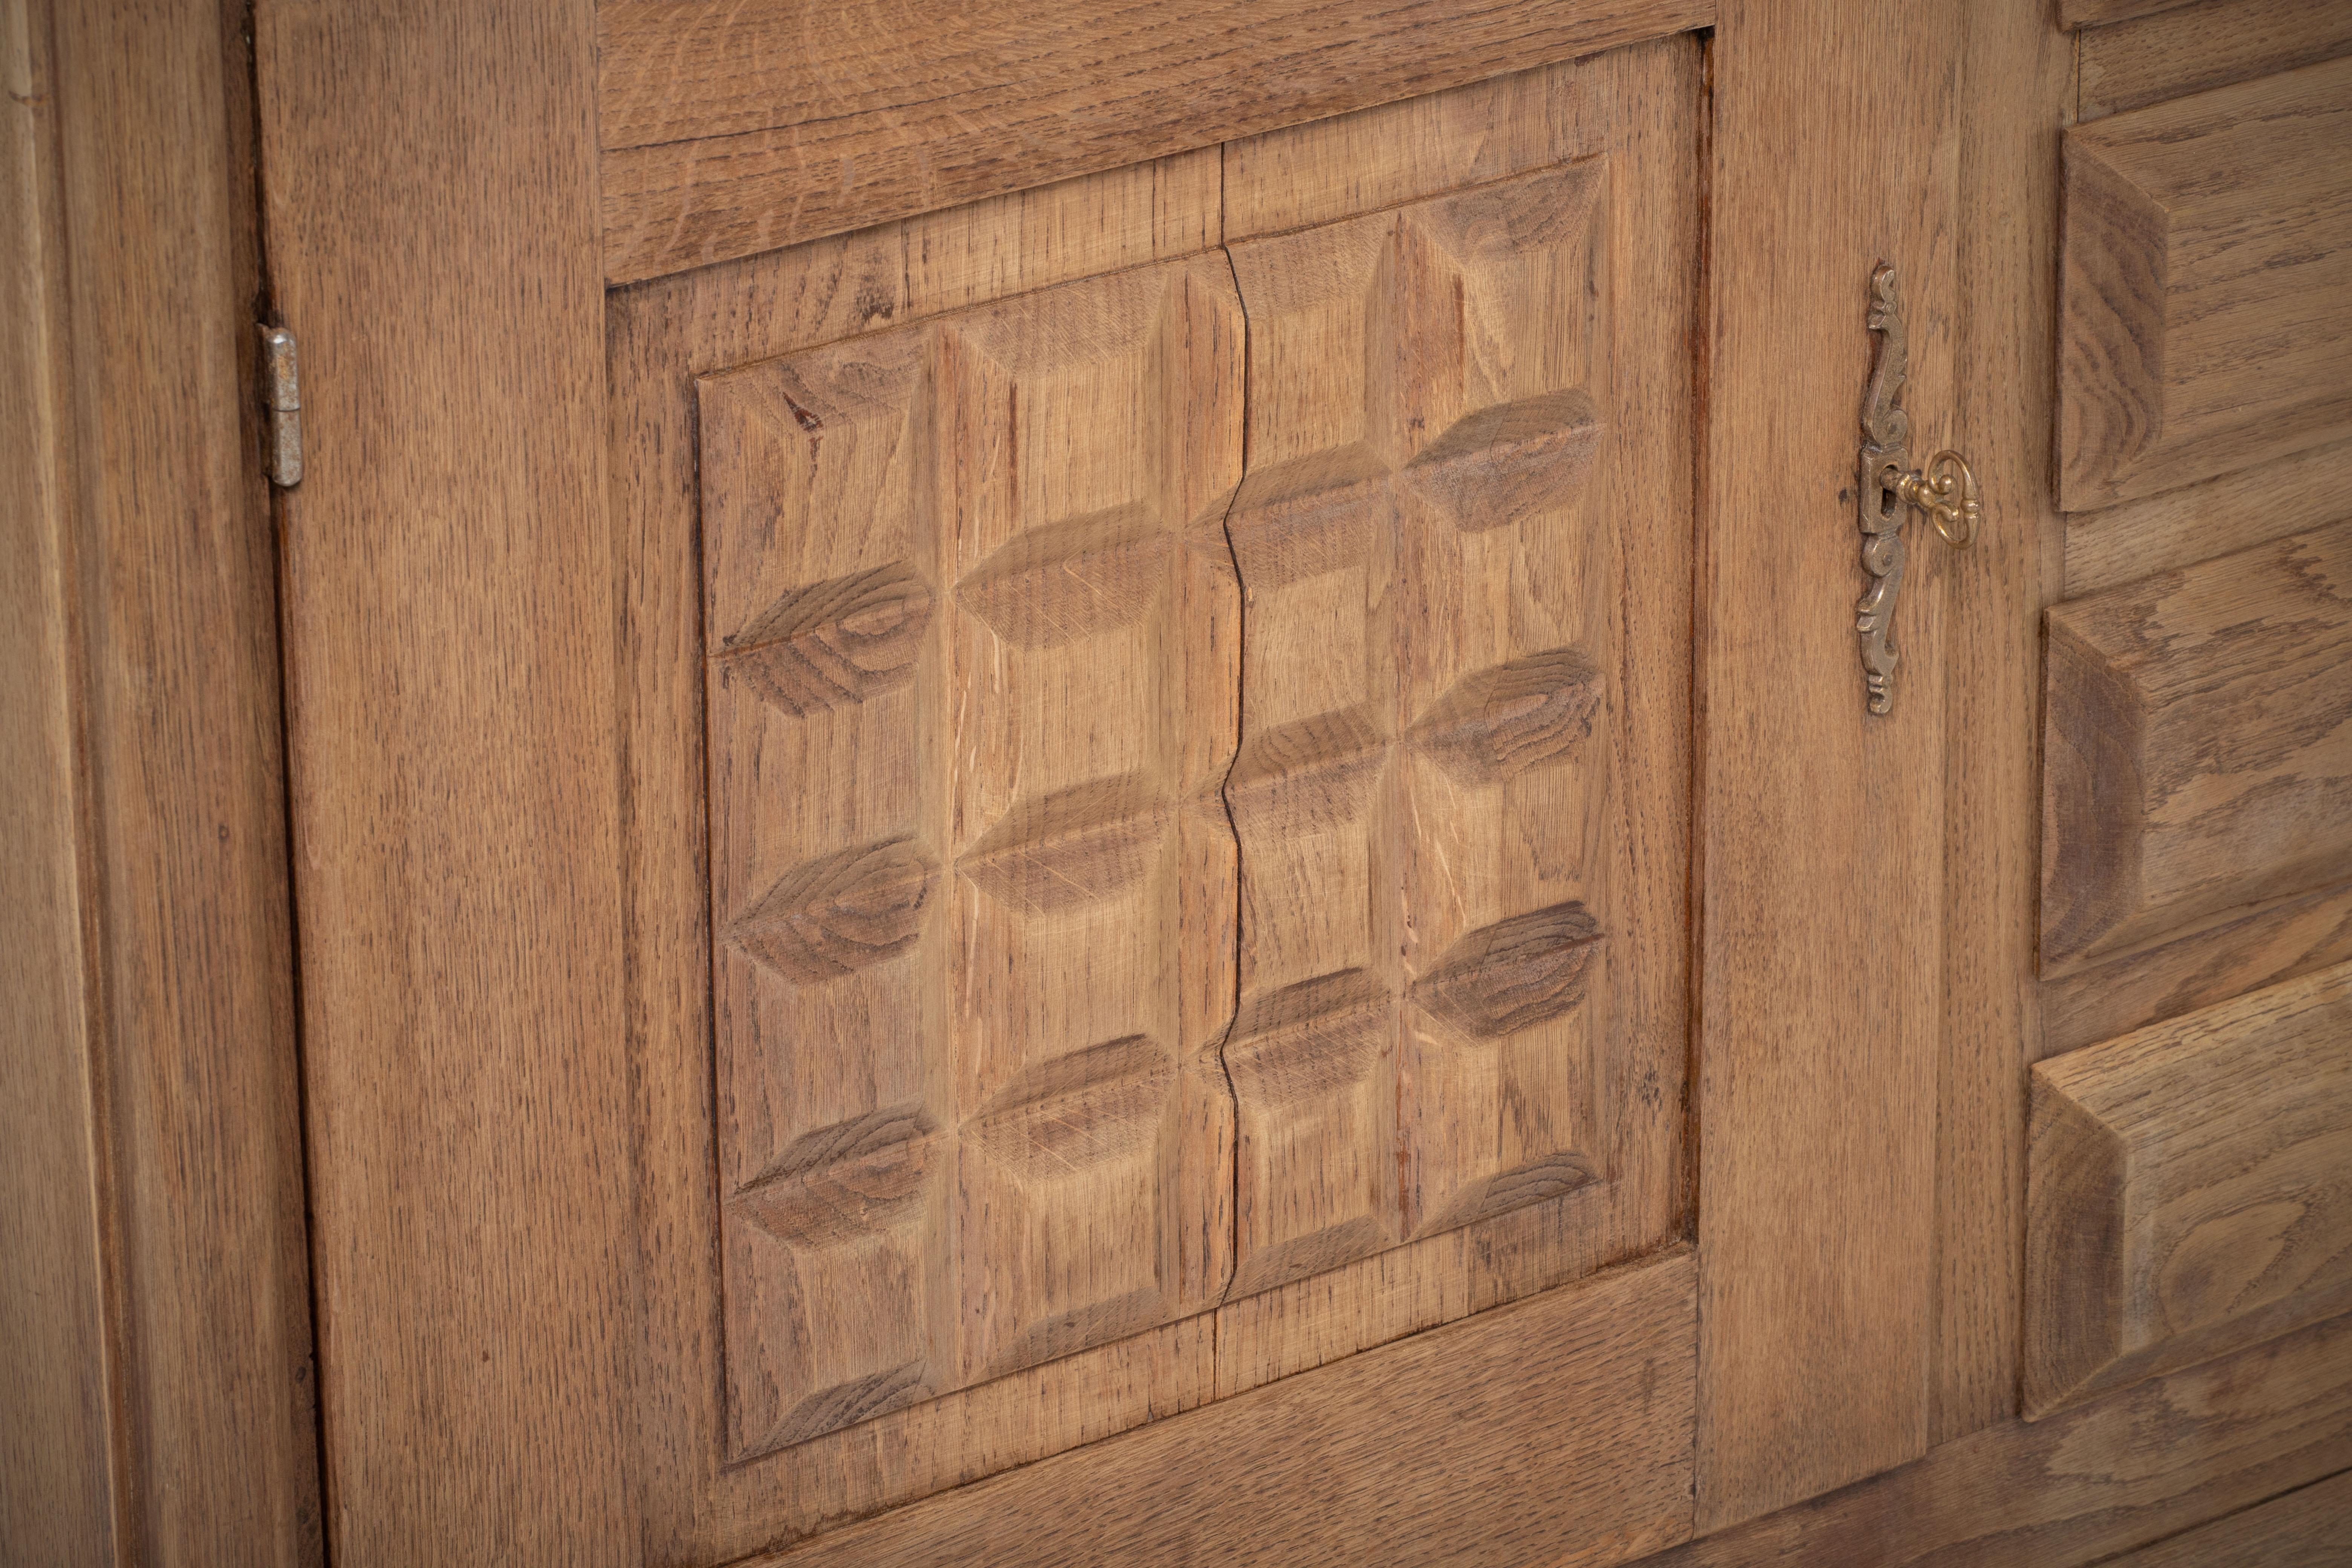 Raw Solid Oak Cabinet with Graphic Details, France, 1940s For Sale 1